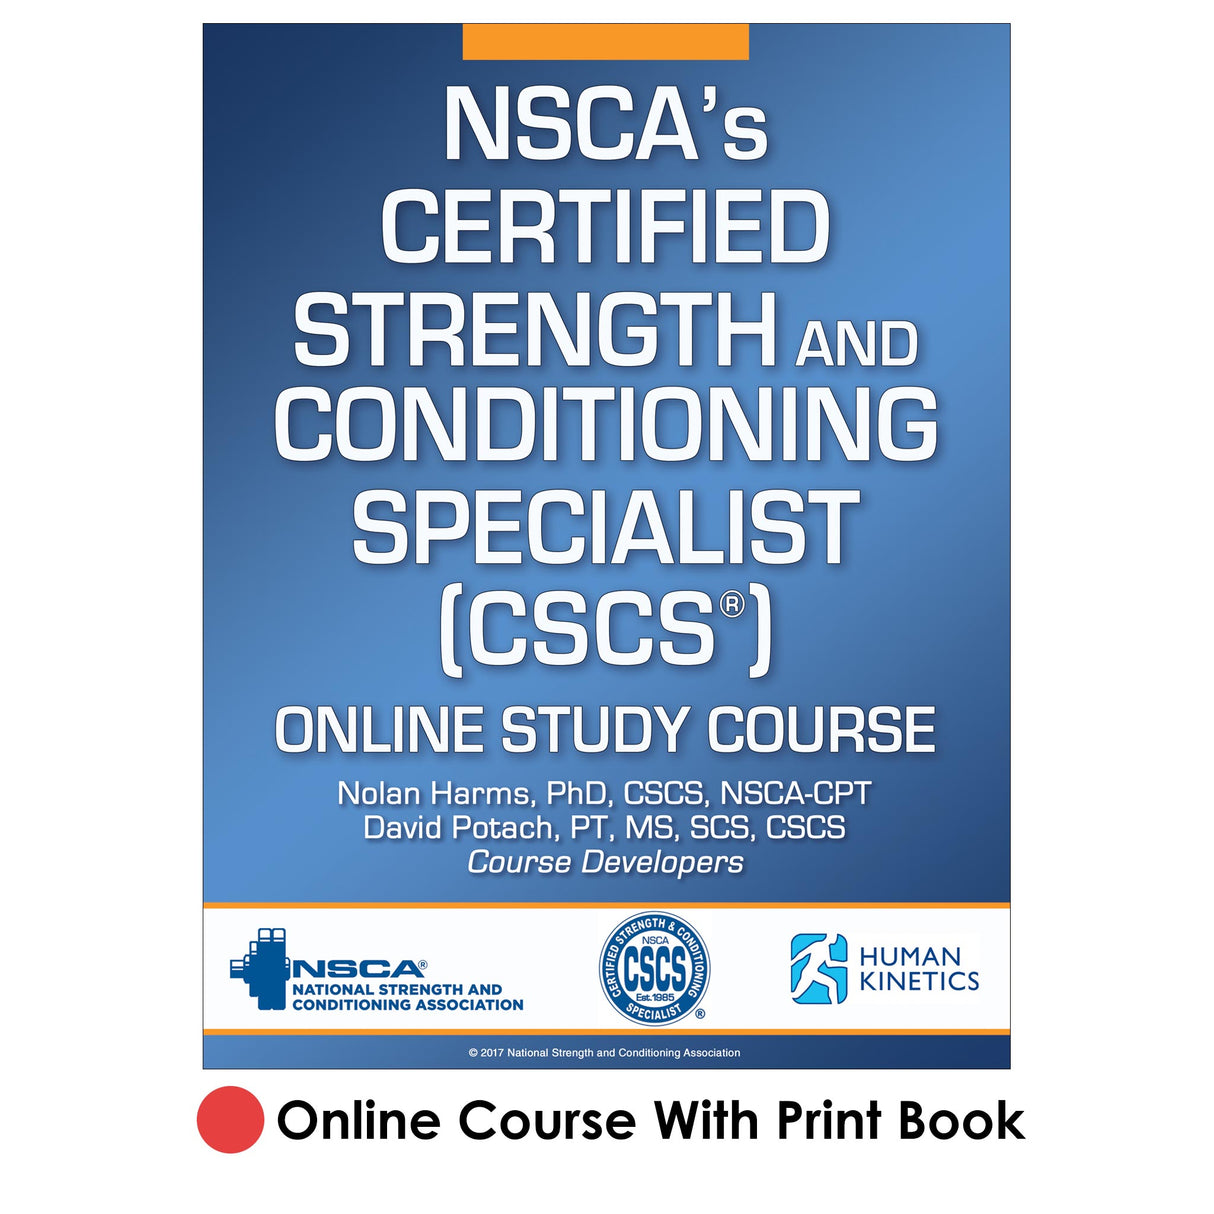 NSCA's Certified Strength and Conditioning Specialist (CSCS) 4th Edition Online Study/CE Course With Print Book